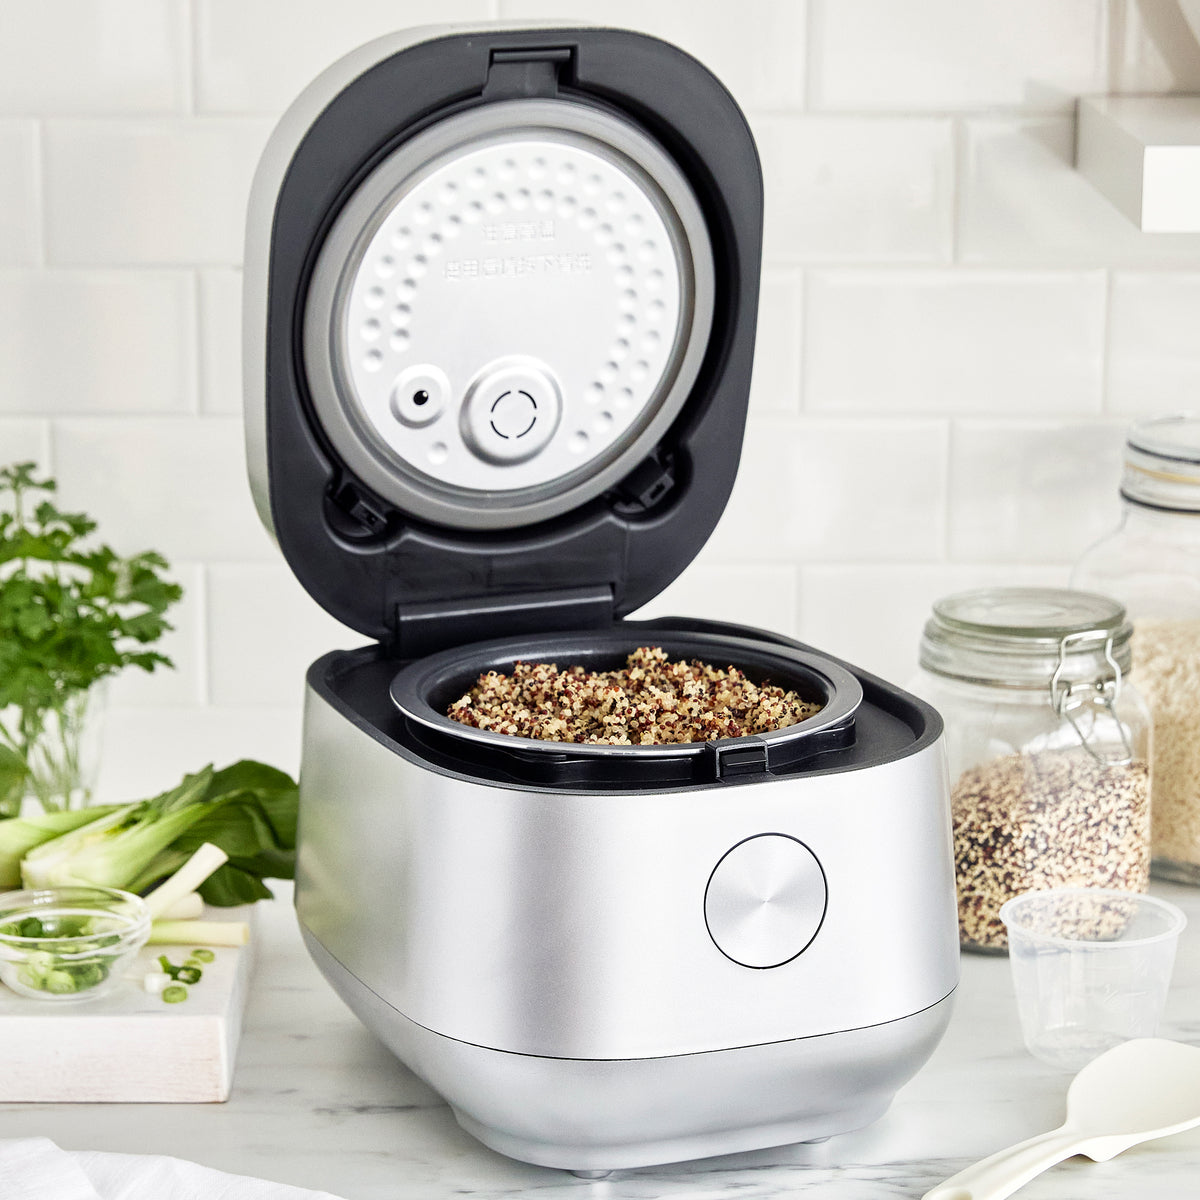 Philips 8L All-in-One Cooker